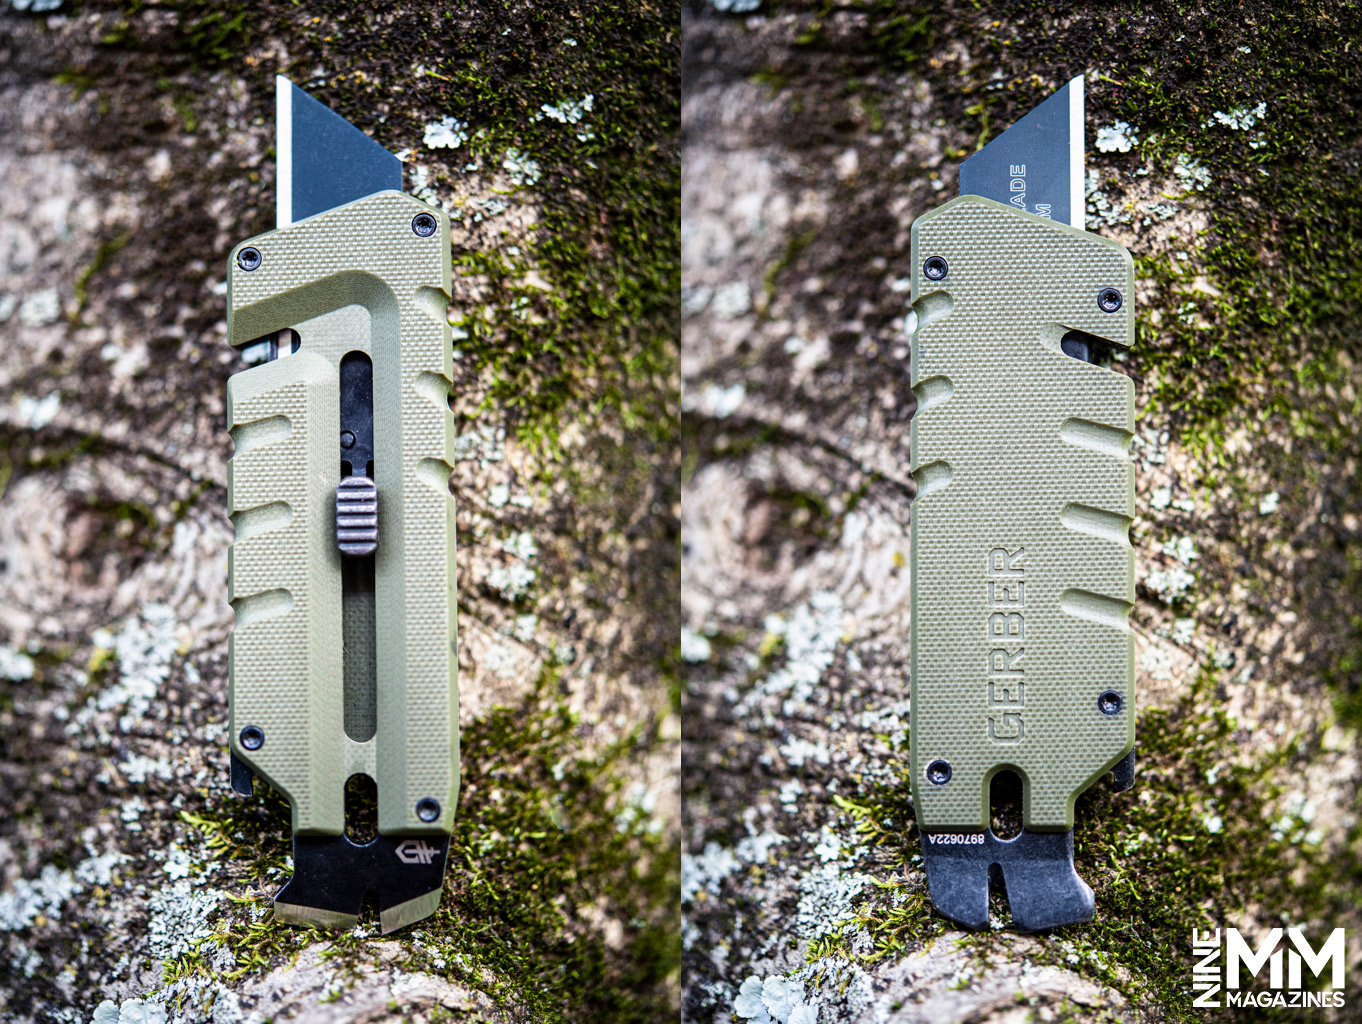 a photo of the Gerber Prybrid Utility Knife in review